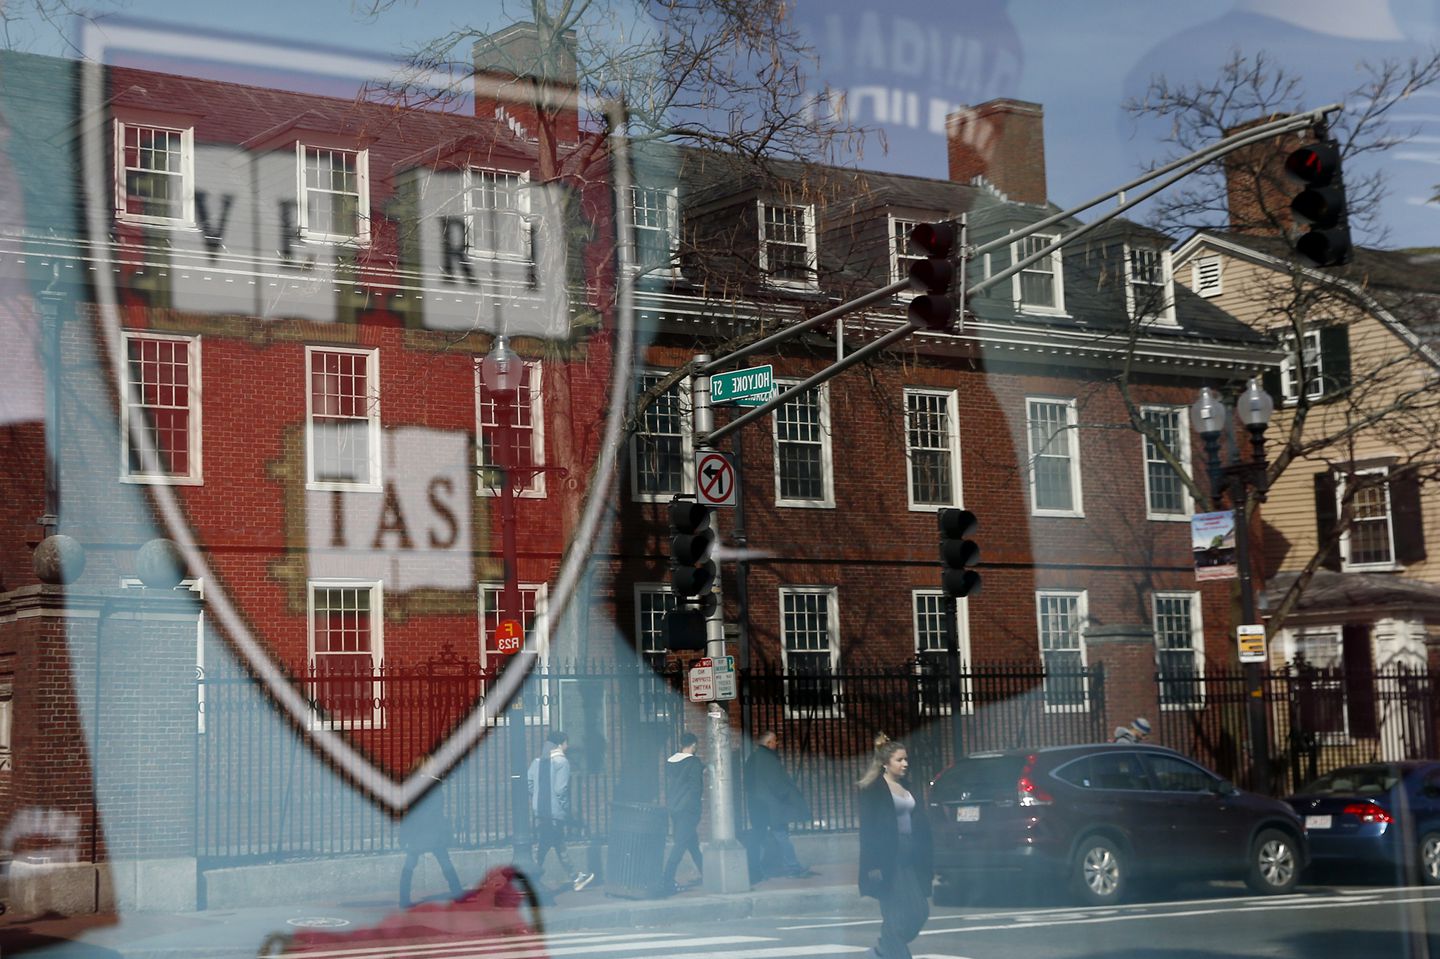 A dean's op-ed proposing discipline for some kinds of faculty speech provoked a backlash at Harvard this week.